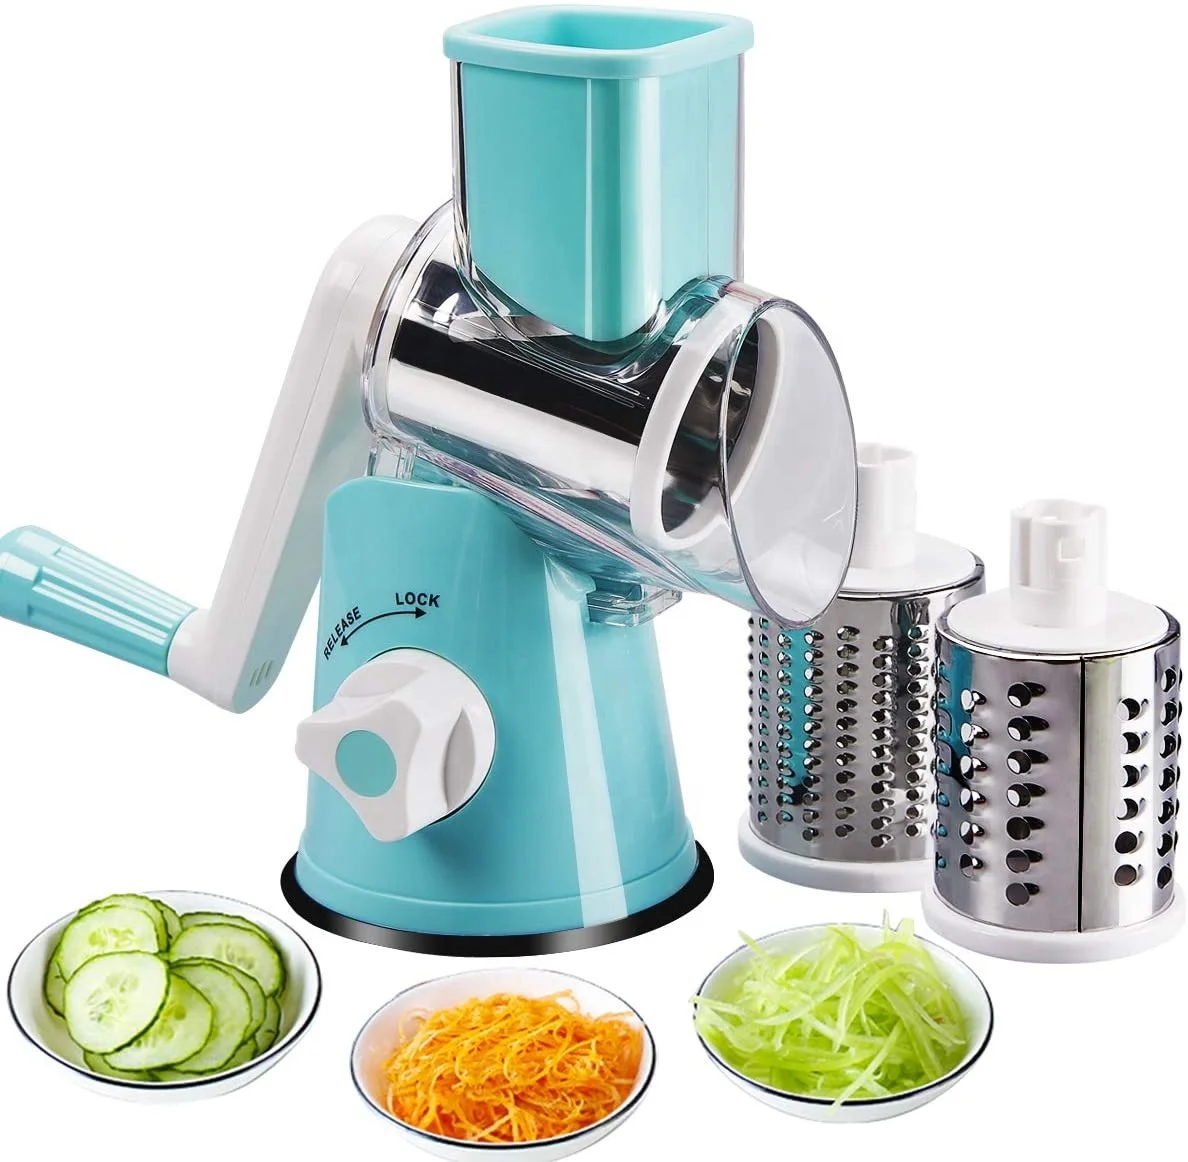 

Multi purpose round vegetable nut onion carrot potato slicer cutter grater with 3 stainless steel blades cheese grater